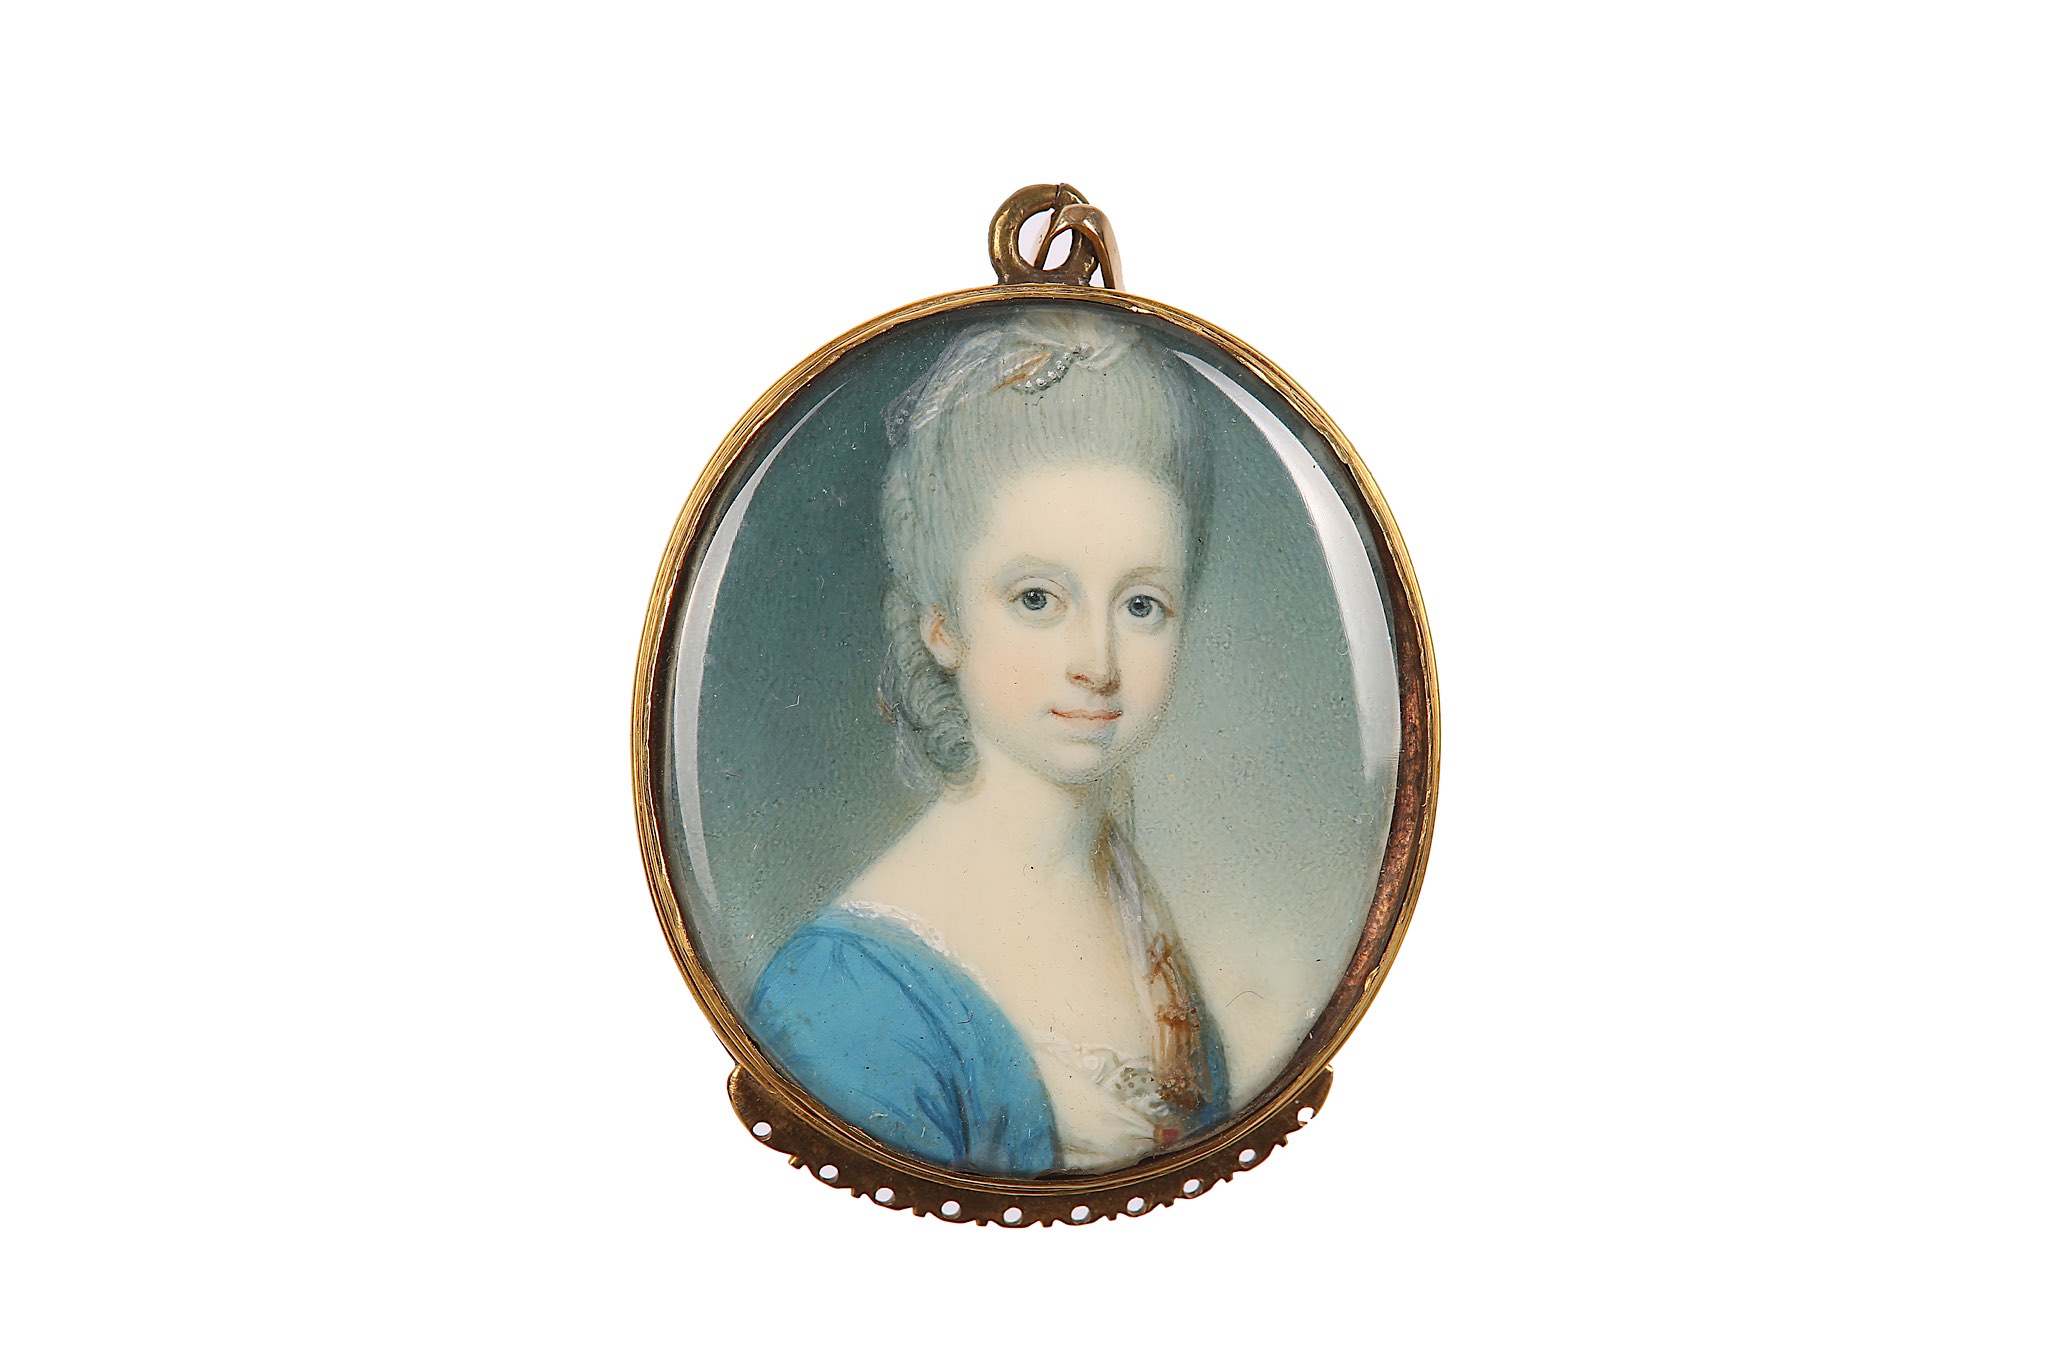 RICHARD CROSSE (BRITISH 1742-1810) Portrait miniature of a Lady, circa 1775, in blue dress with